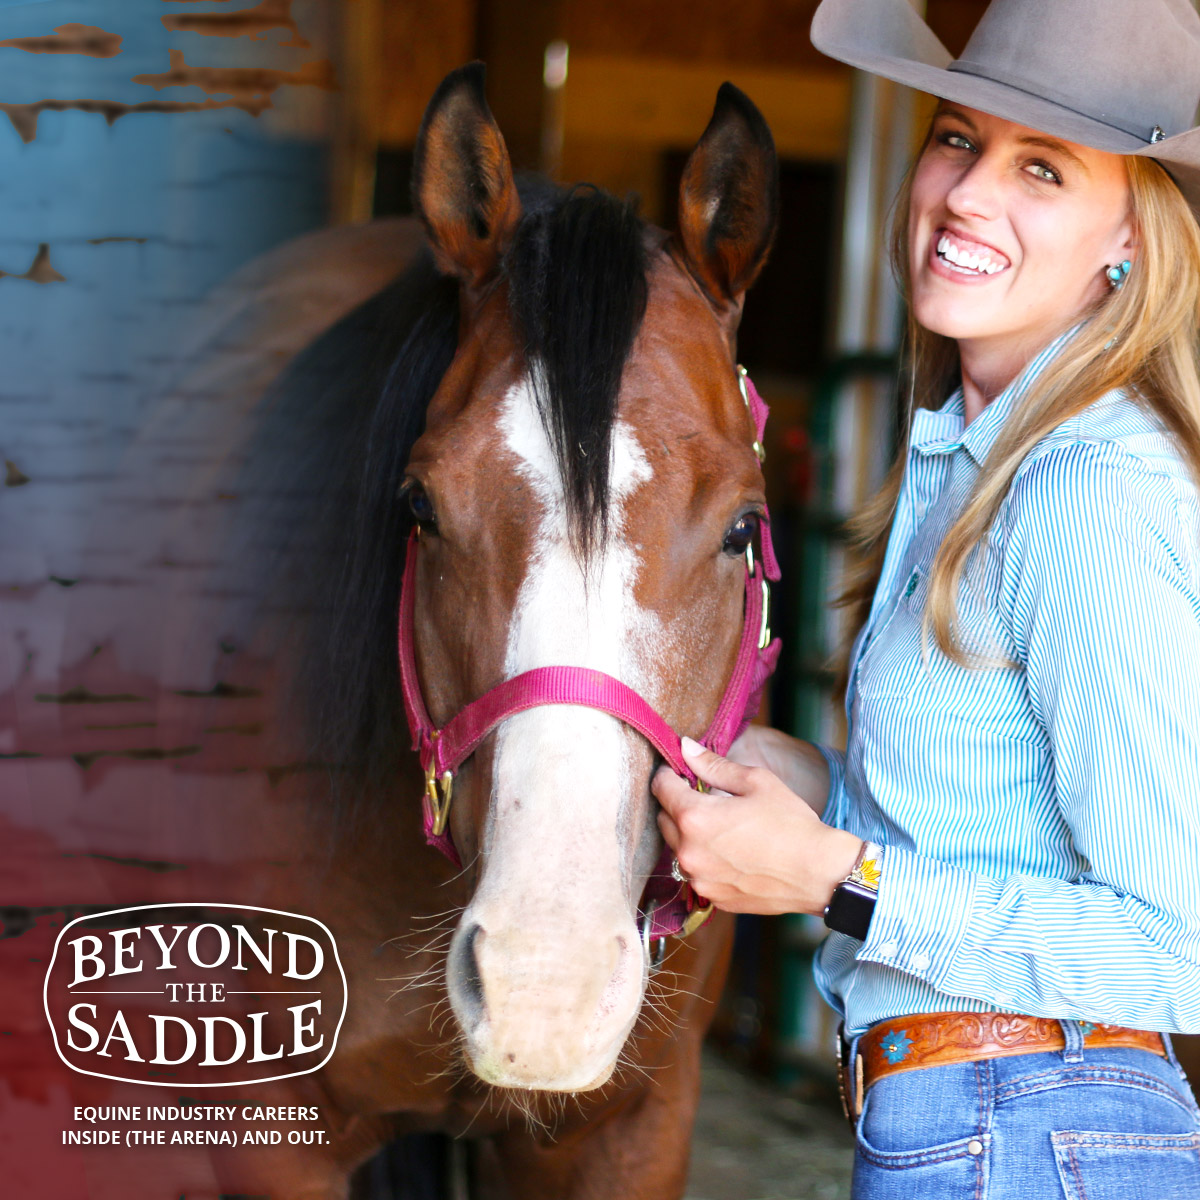 New Equine Industry Podcast Delivers the Career Insight You’ve Been Searching For